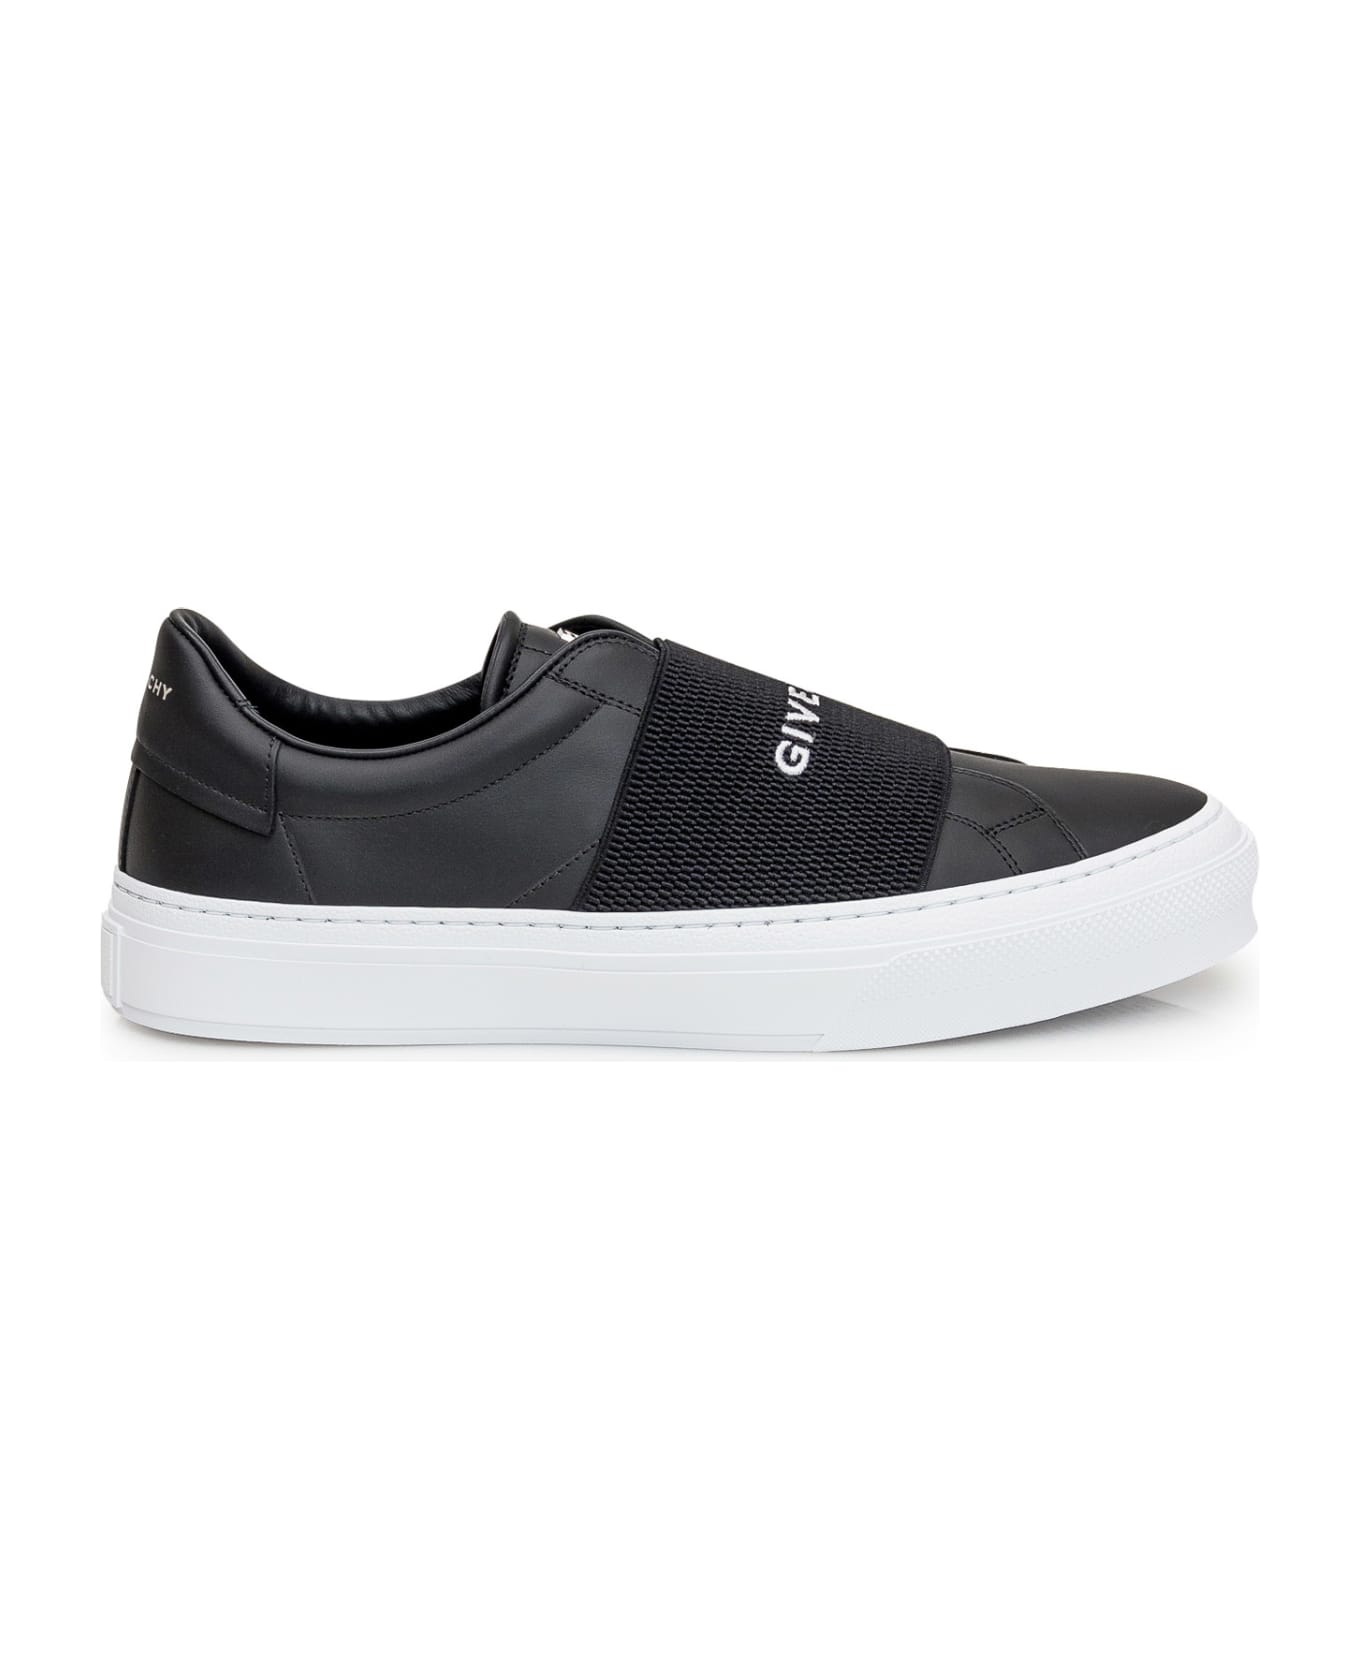 Givenchy City Sport Sneakers - Black スニーカー